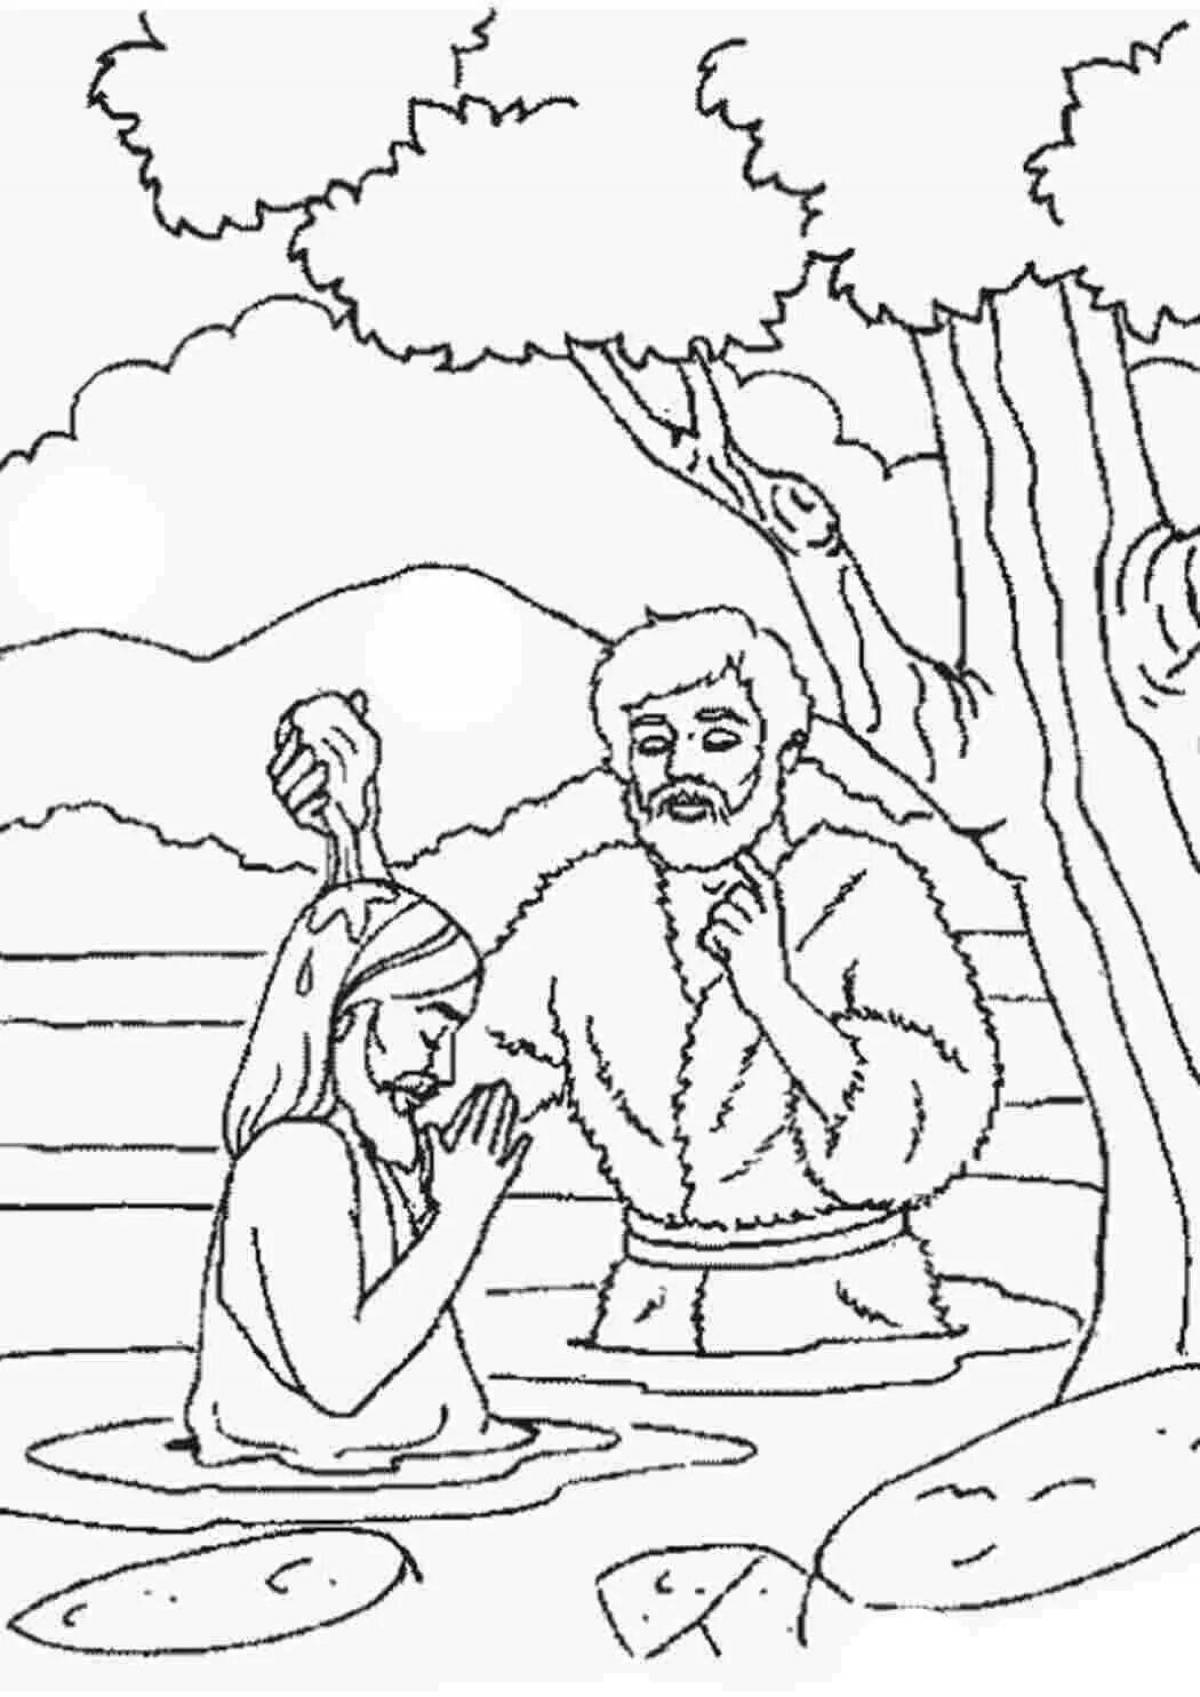 Exquisite baptism coloring book